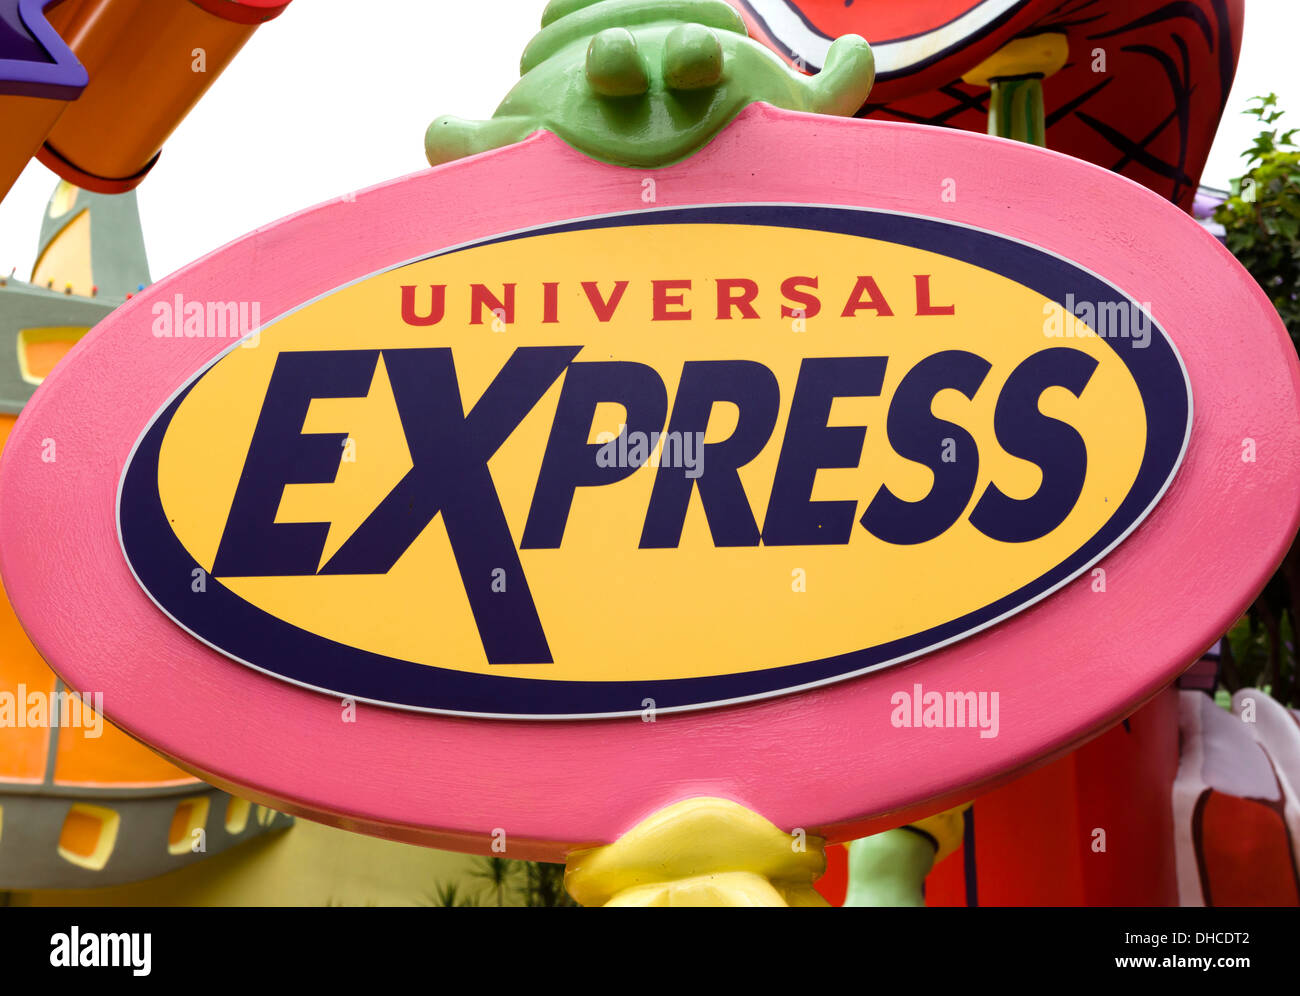 Sing for Universal Express lane, allowing faster access to rides, Islands of Adventure, Universal Orlando Resort, Florida, USA Stock Photo